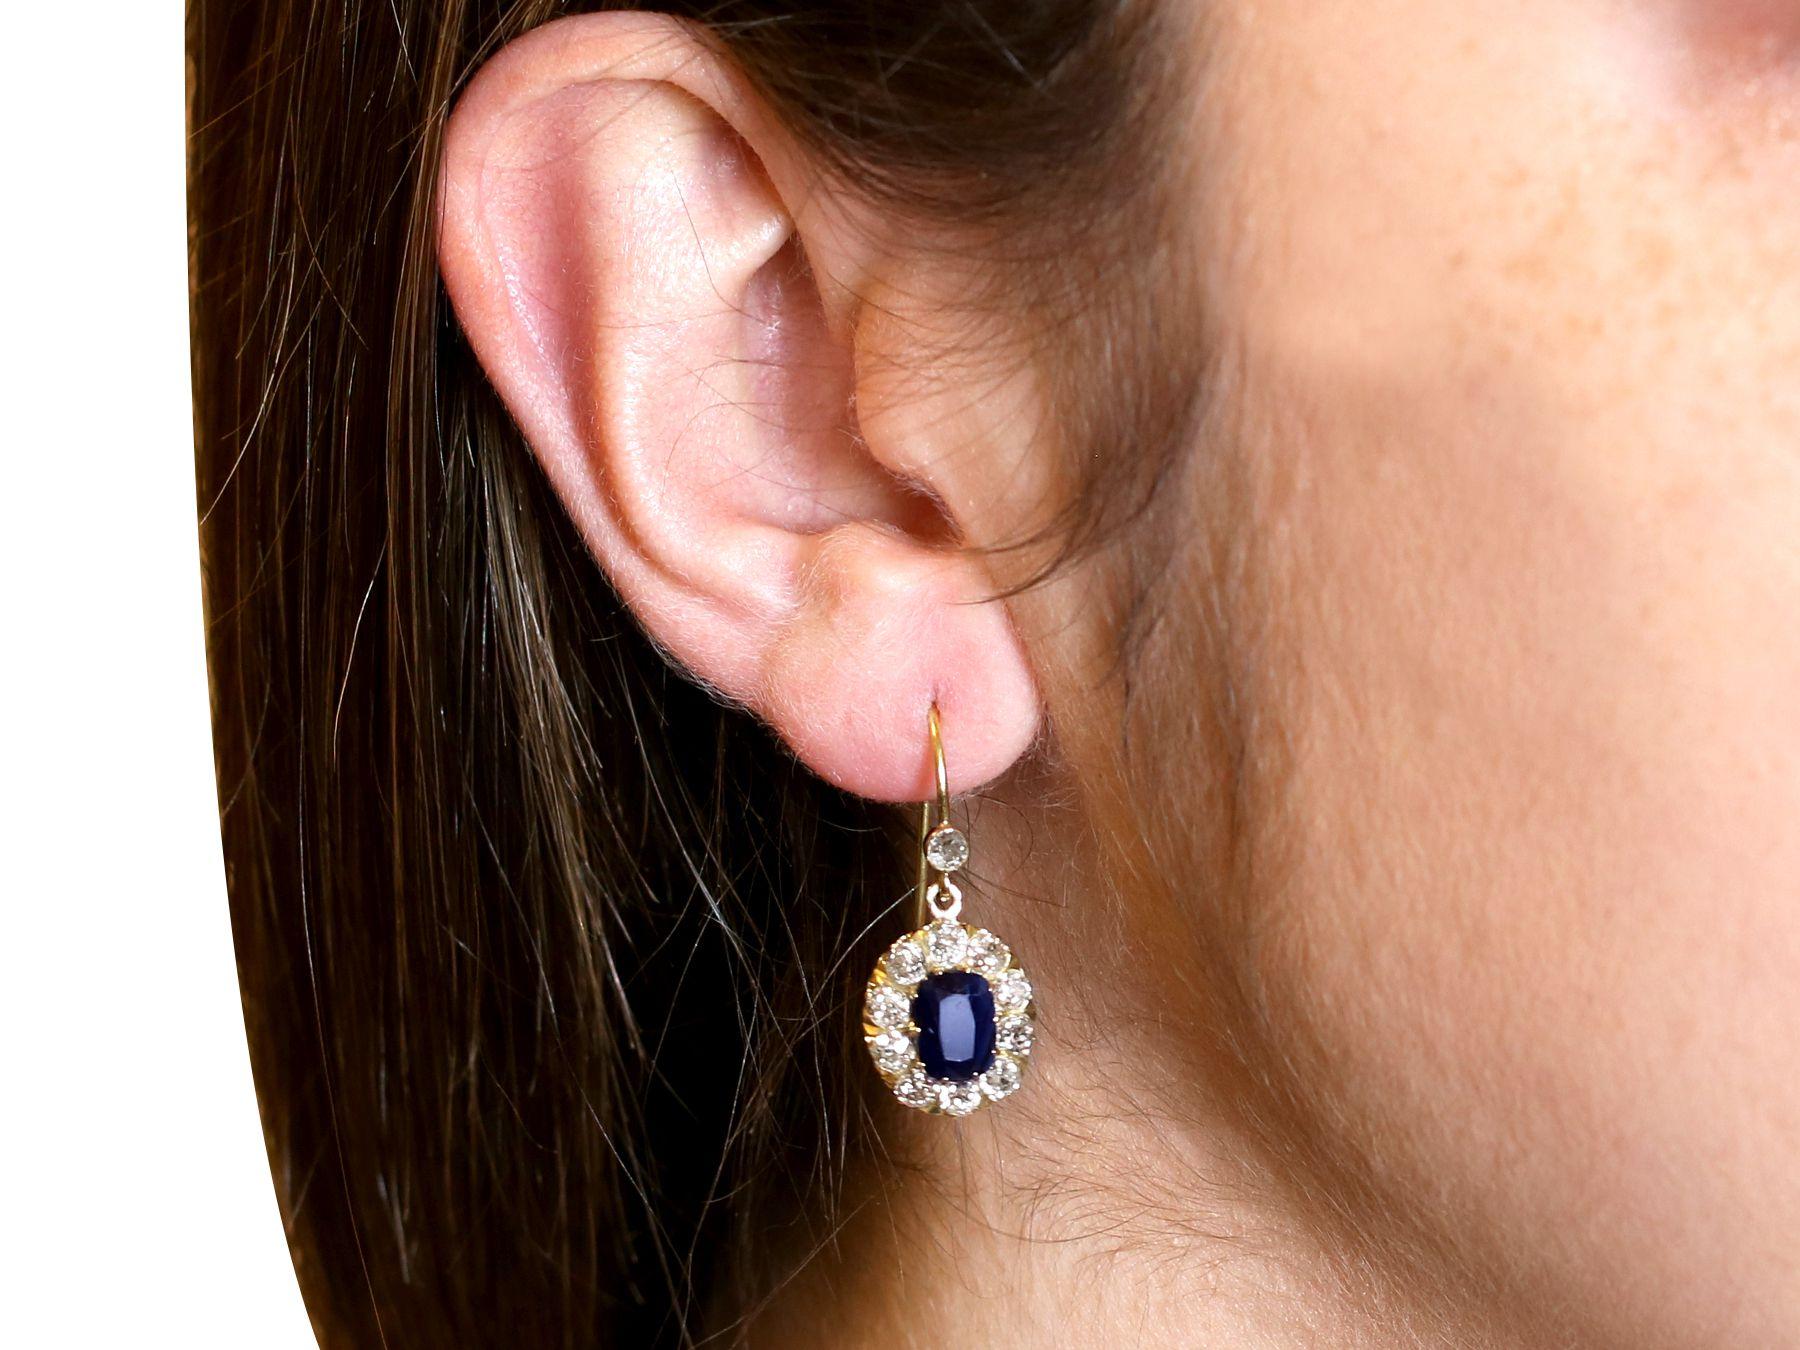 A stunning, fine and impressive pair of antique 2.22 carat blue sapphire and 1.20 carat diamond, 15 carat yellow gold drop earrings; part of our antique jewellery and estate jewelry collections

Description
These stunning, fine and impressive